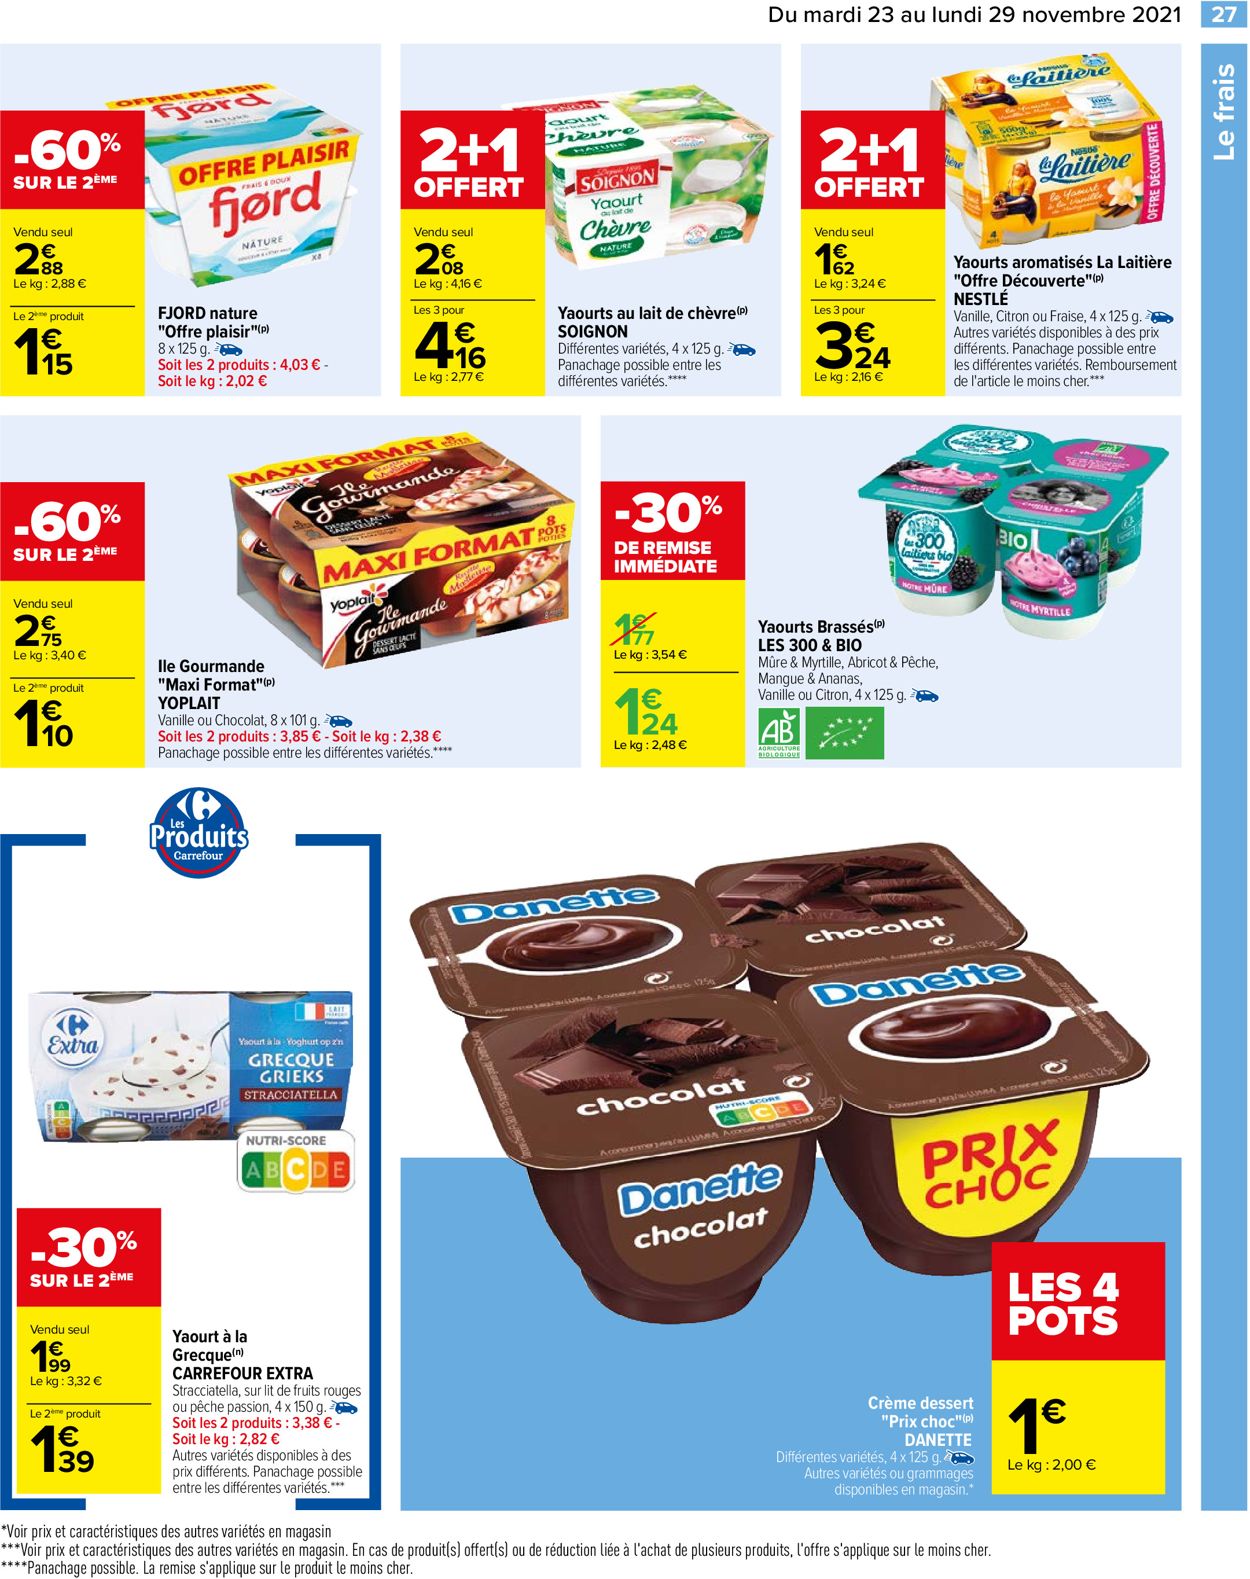 Carrefour BLACK WEEK 2021 Catalogue - 23.11-29.11.2021 (Page 27)